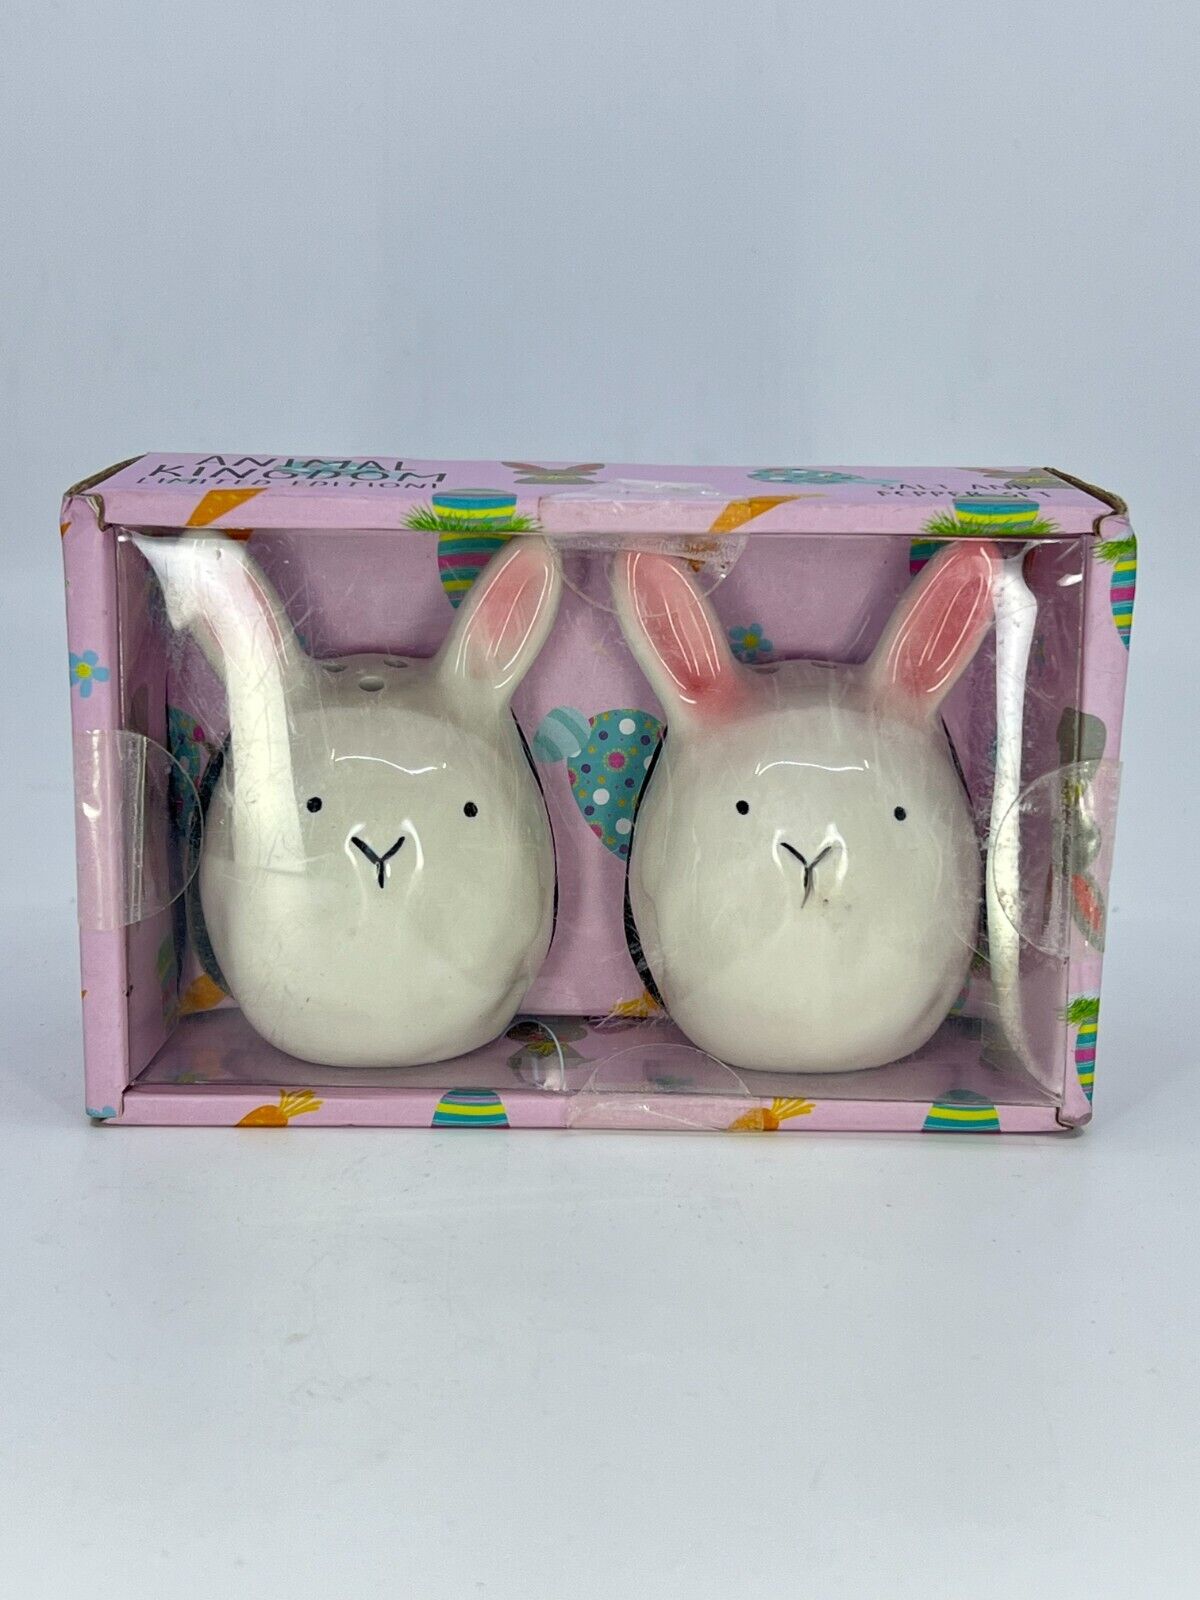 NEW in BOX Animal Kingdom Dimpled Bunny Salt & Pepper Shakers CUTE BUNNIES